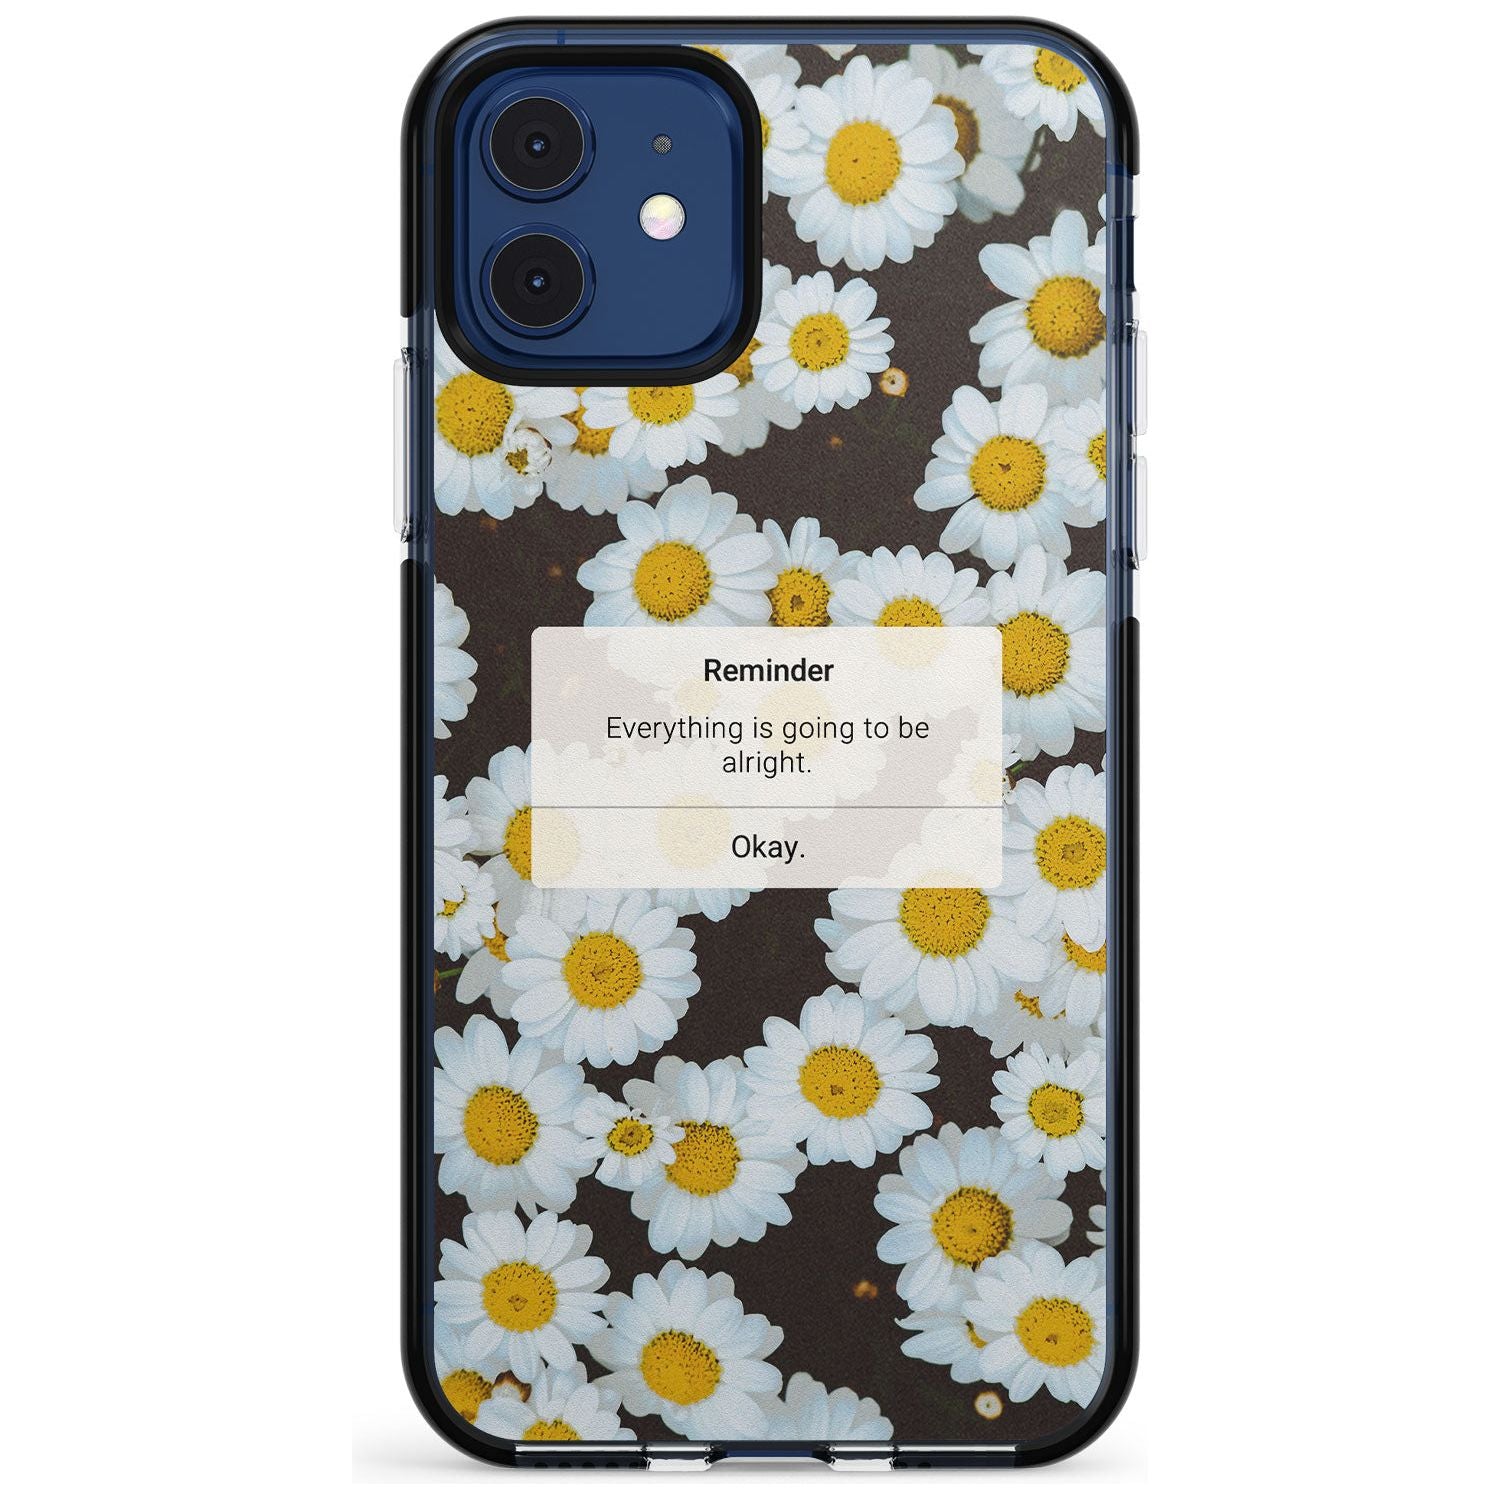 "Everything will be alright" iPhone Reminder Pink Fade Impact Phone Case for iPhone 11 Pro Max